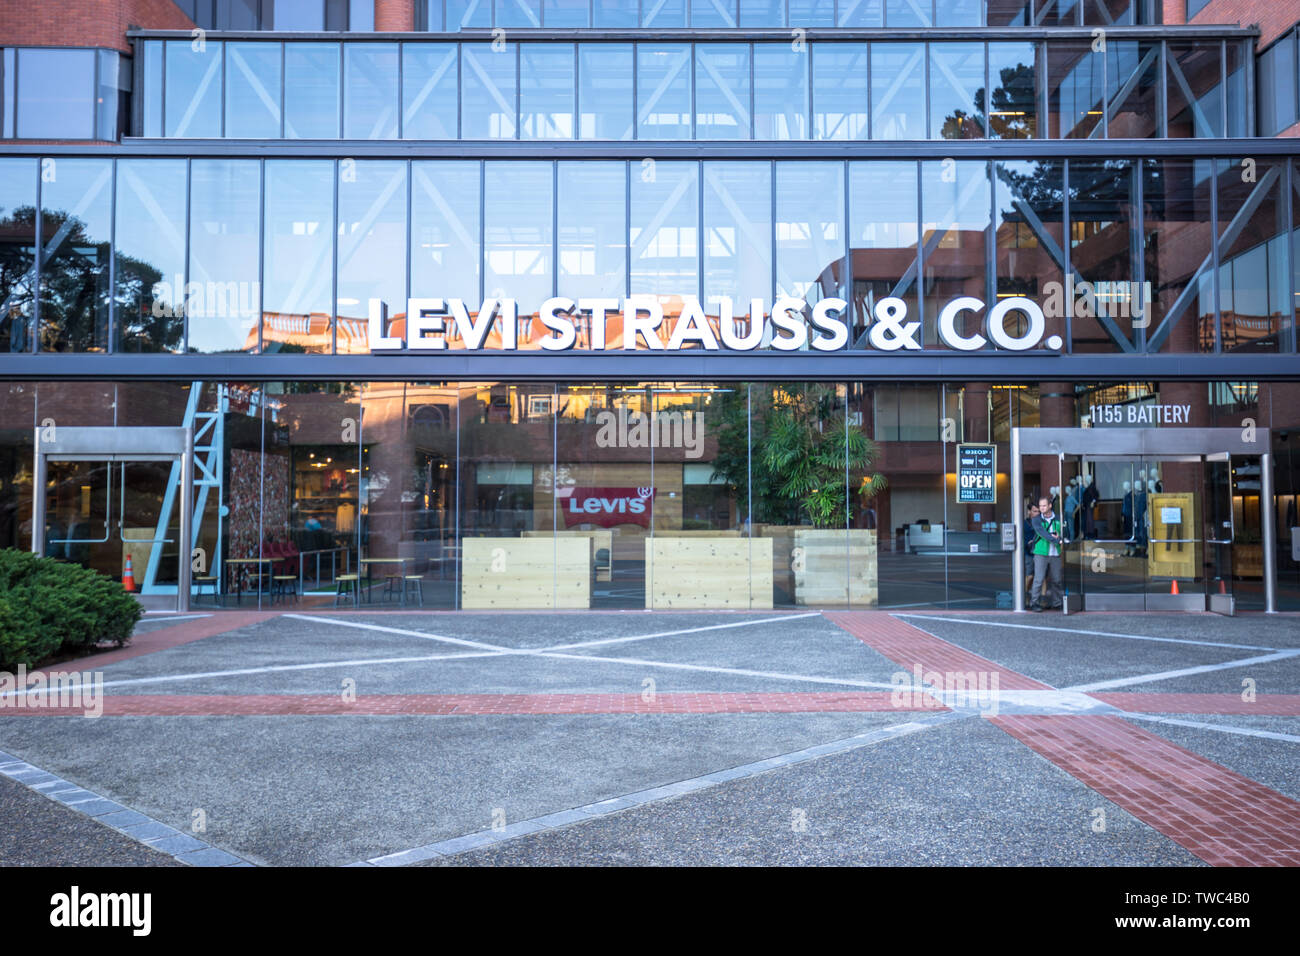 levi strauss & co corporate office